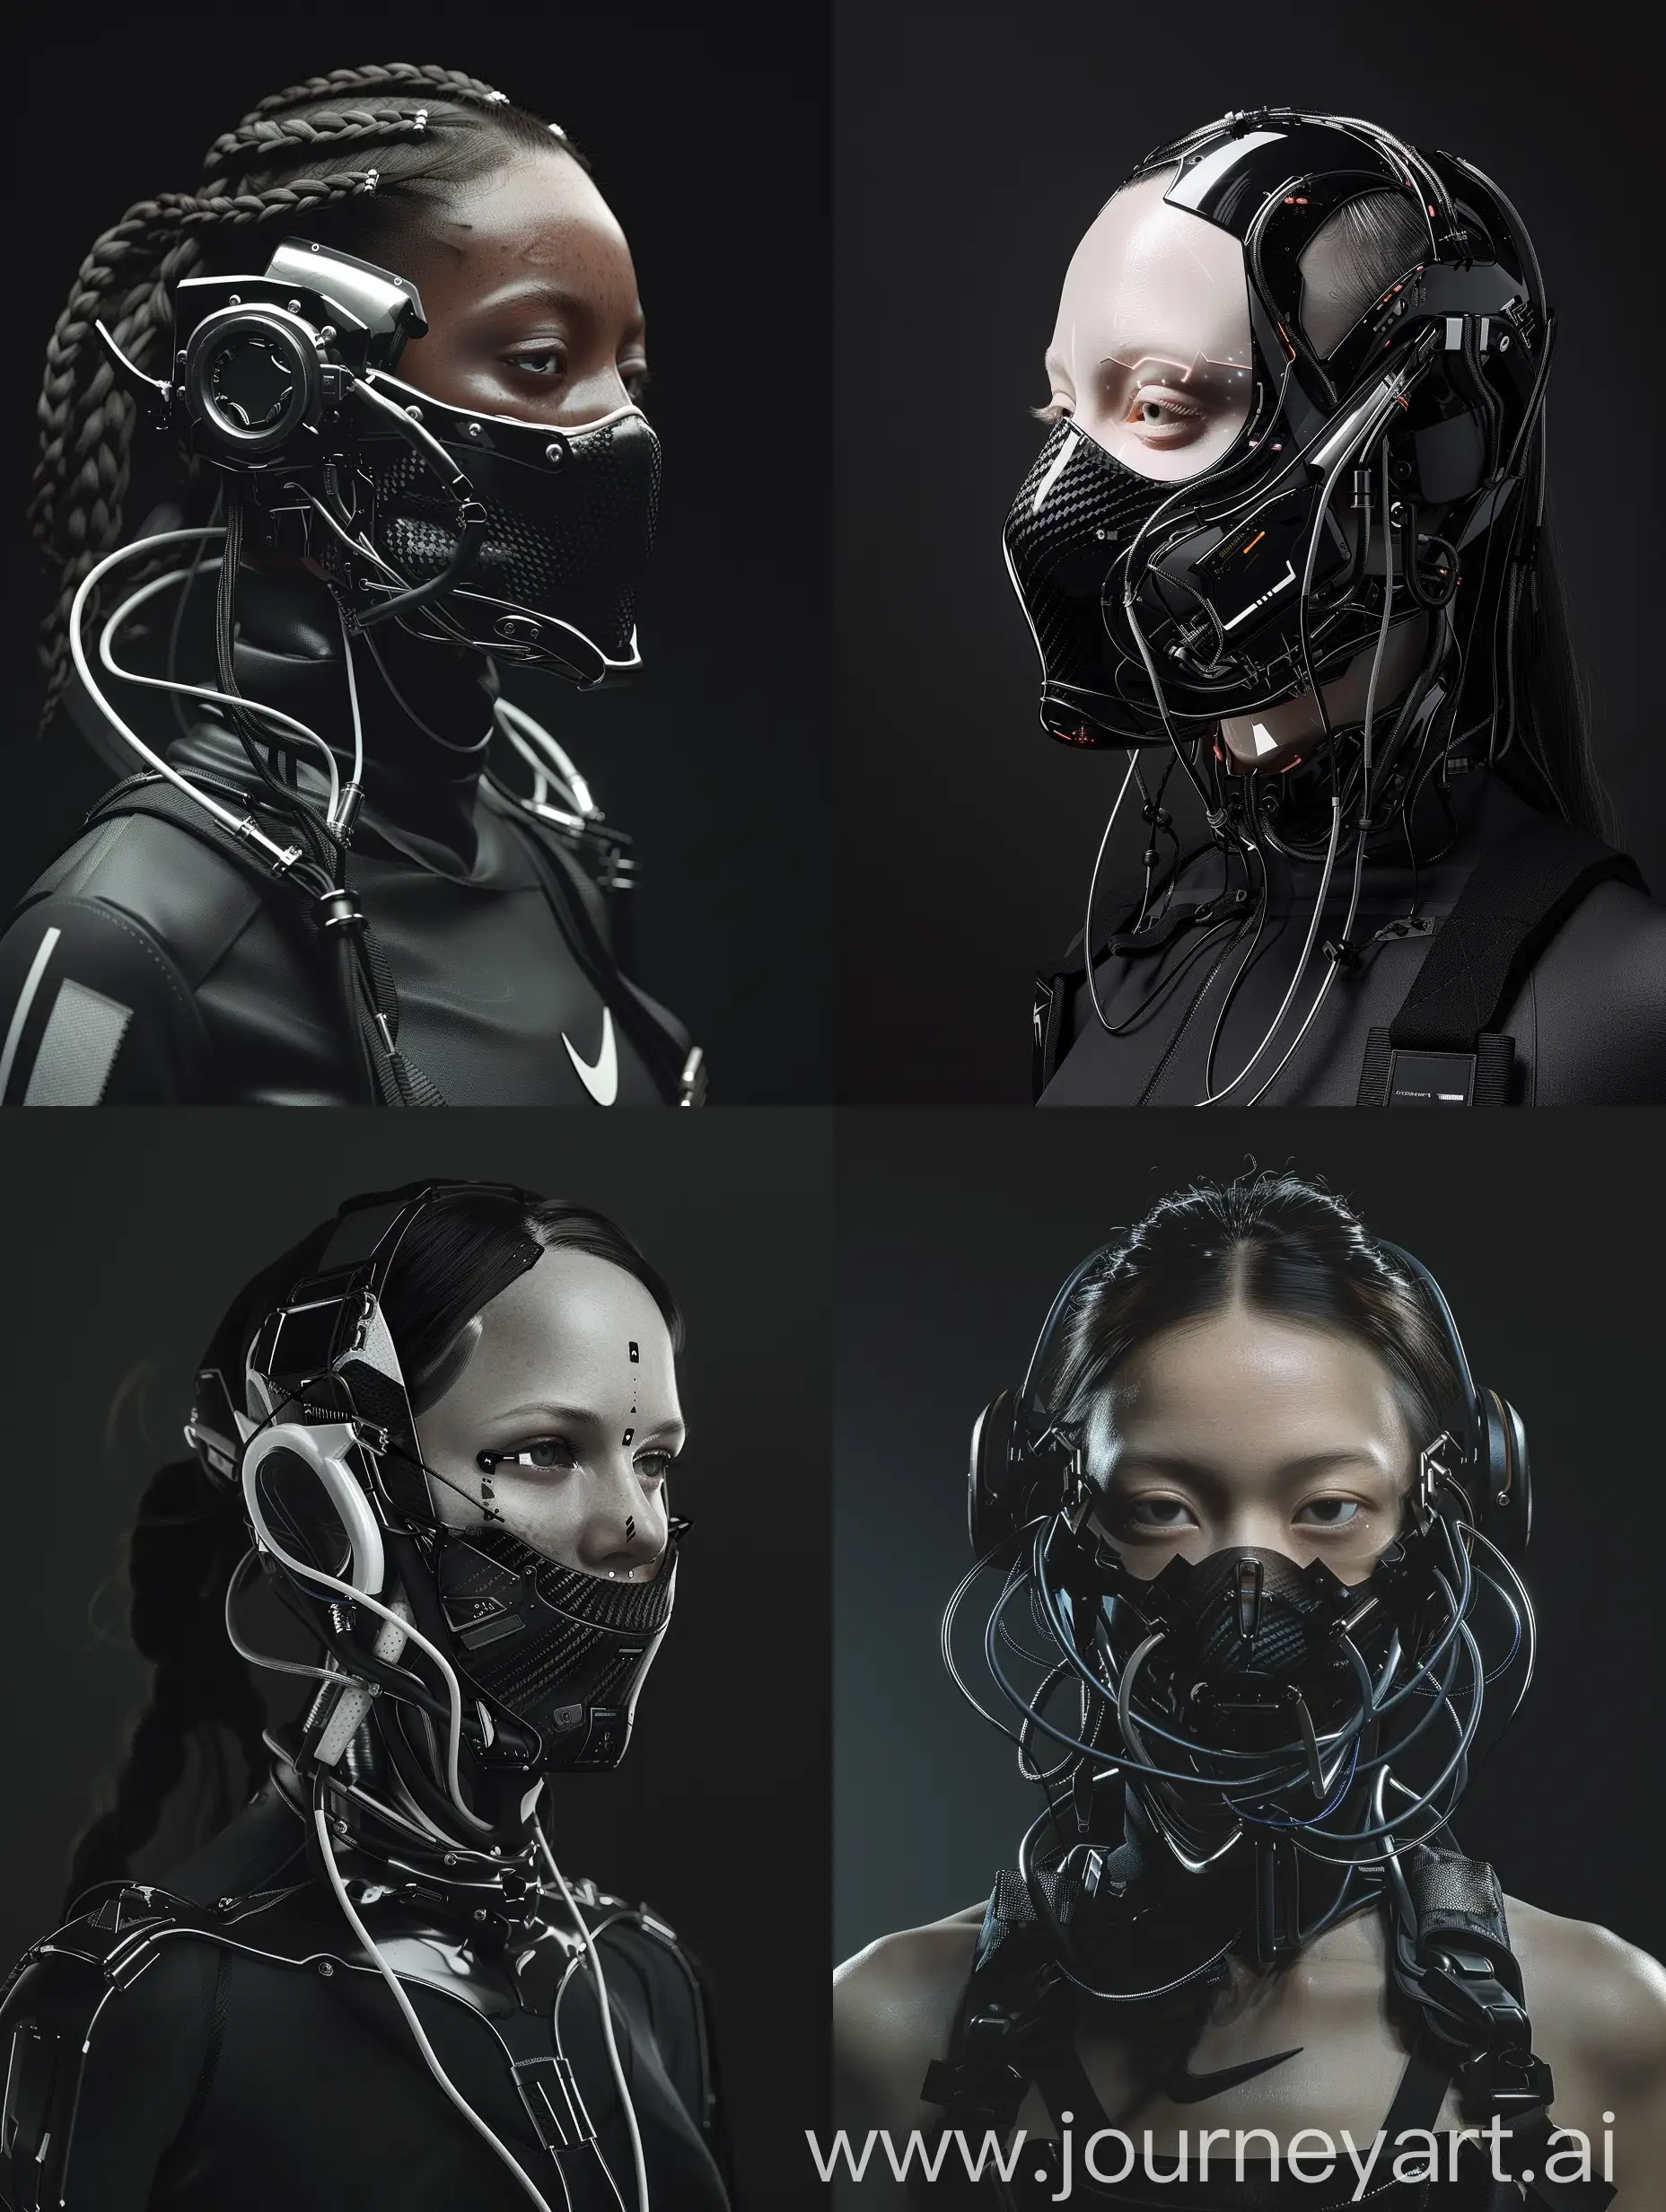 Against a sleek black backdrop, witness the captivating presence of a character adorned with a cybernetic mouth-covering mask. It seamlessly merges cutting-edge technology with intricate details, showcasing carbon fiber textures, sleek aluminum accents, and pulsating wires. Symbolizing the delicate equilibrium between humanity and machine, her appearance embodies the essence of a futuristic cyberpunk aesthetic, further accentuated by Nike-inspired add-ons. With dynamic movements reminiscent of action-packed film sequences, accompanied by cinematic haze and an electric energy, she exudes an irresistible allure that commands attention.